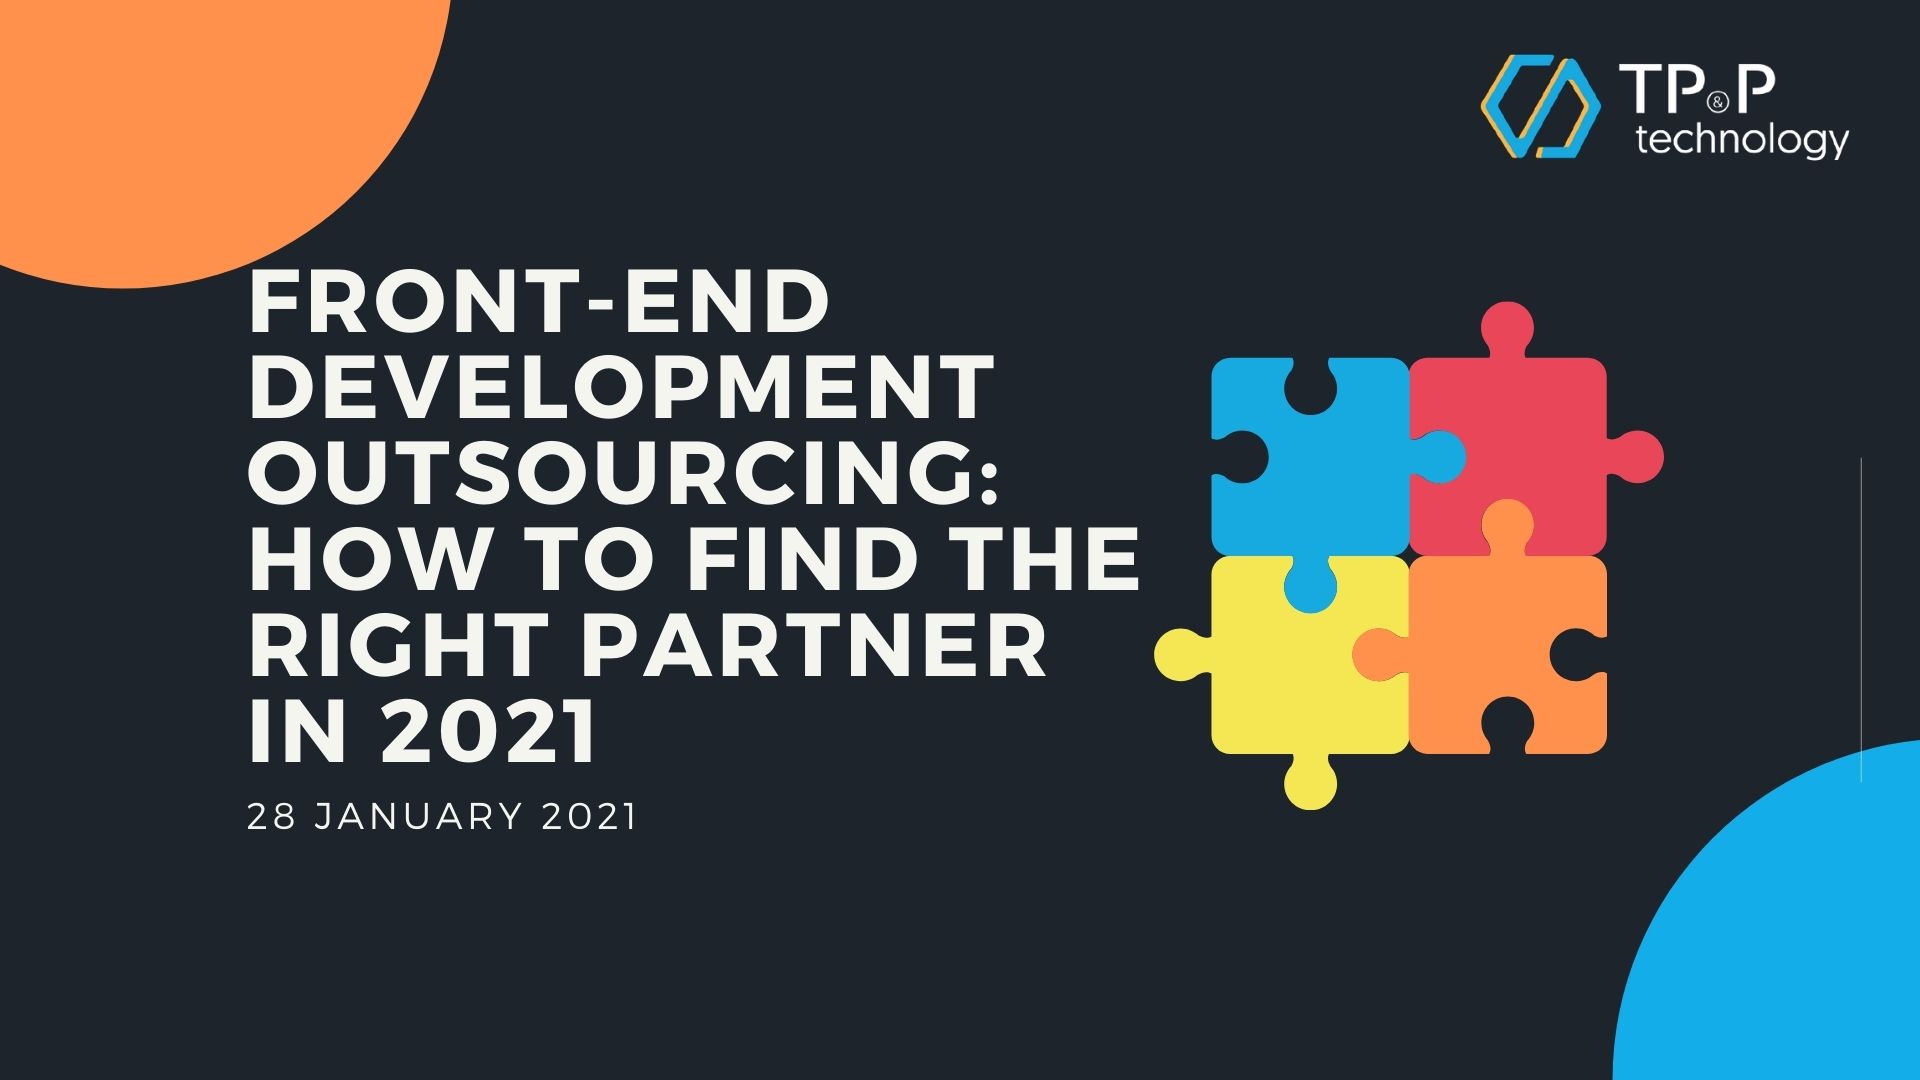 Front-end development outsourcing: How to find the right partner In 2021